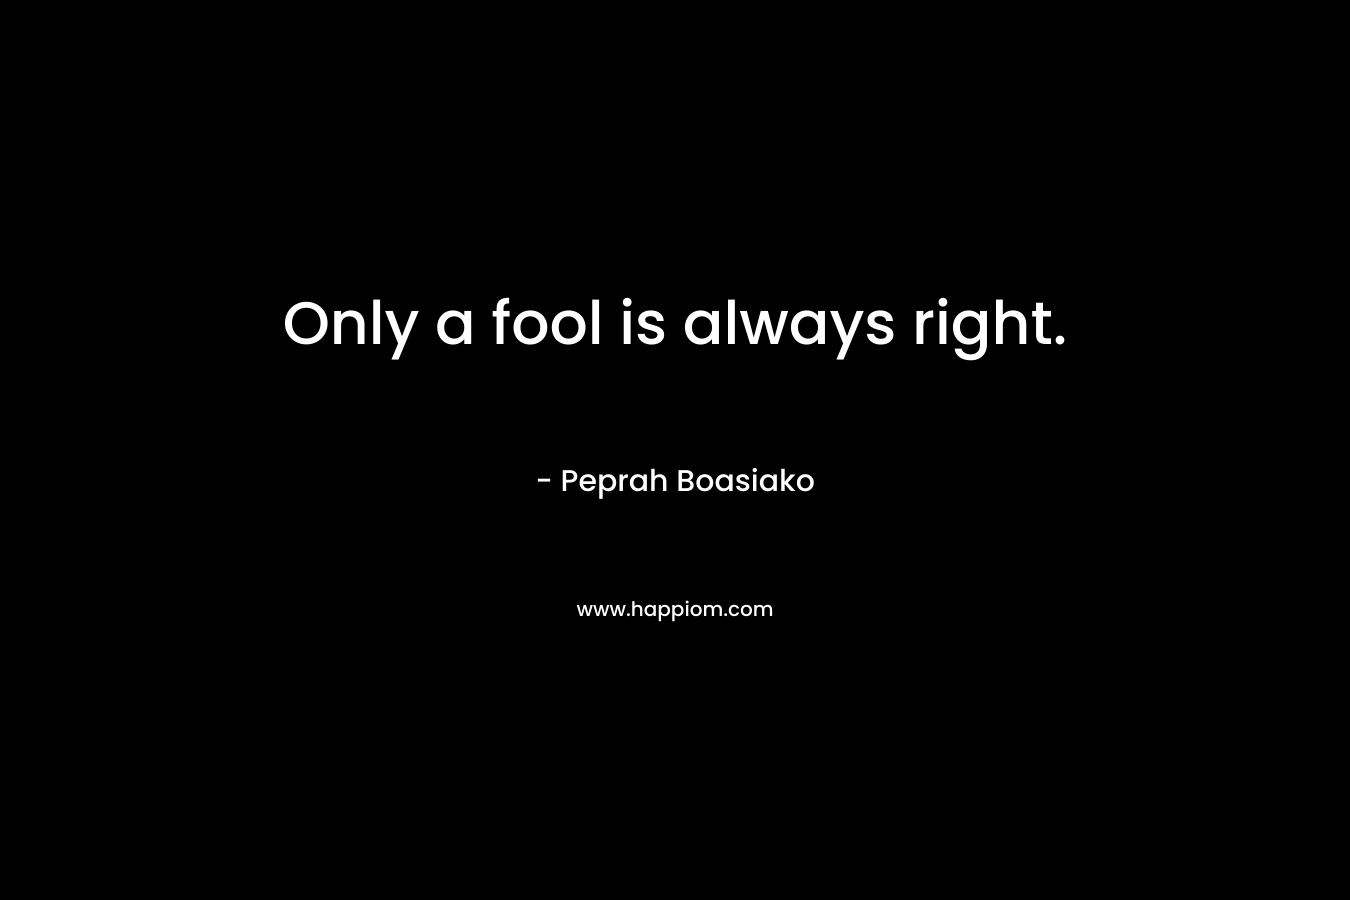 Only a fool is always right. – Peprah Boasiako